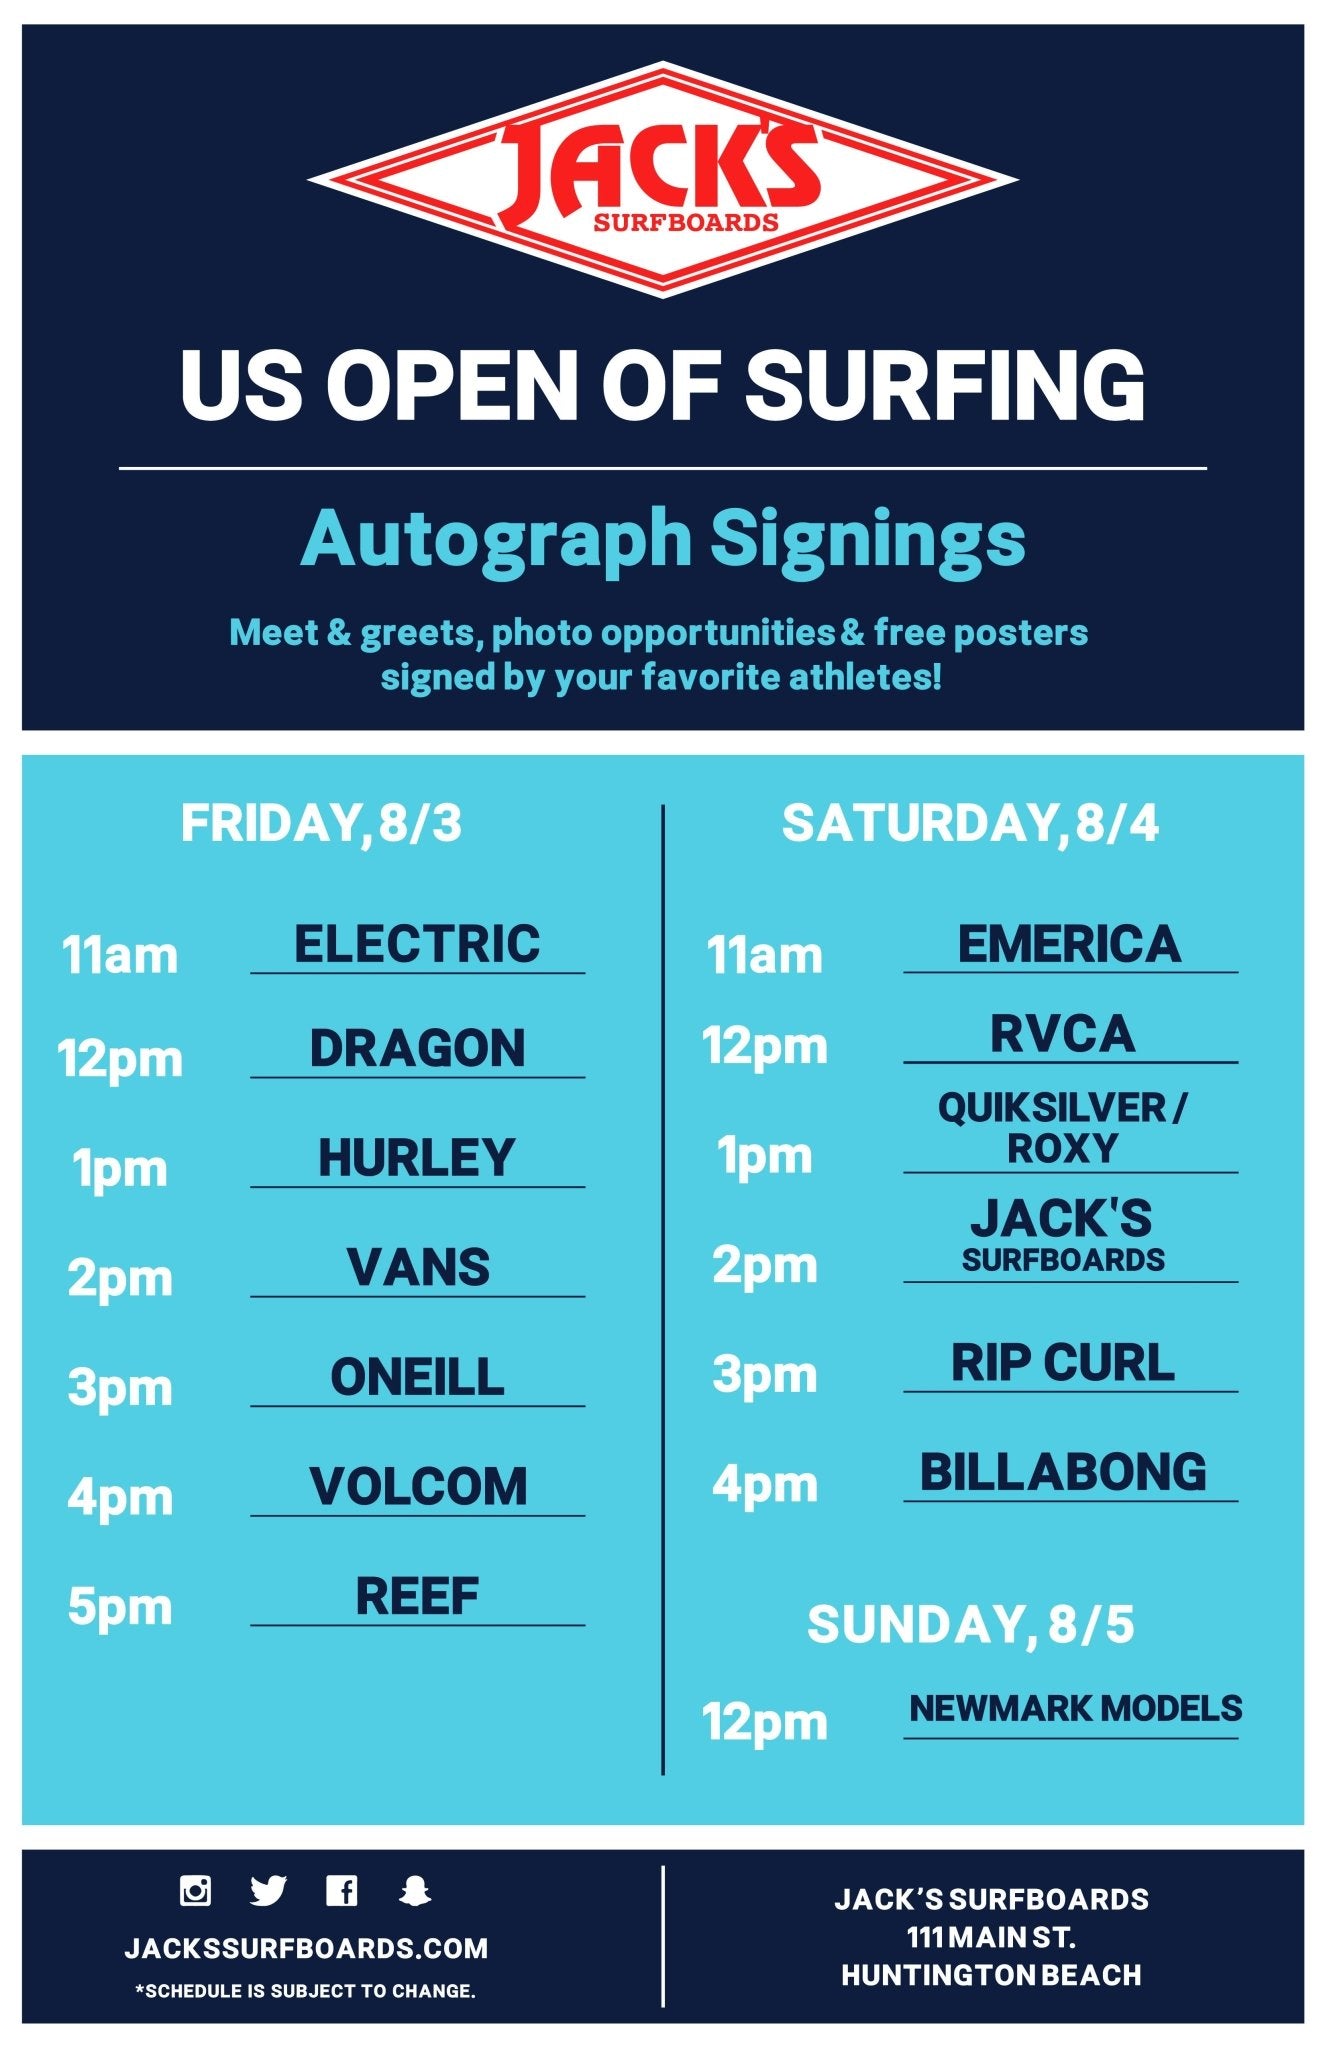 US Open of Surfing Signings | Jack's Surfboards